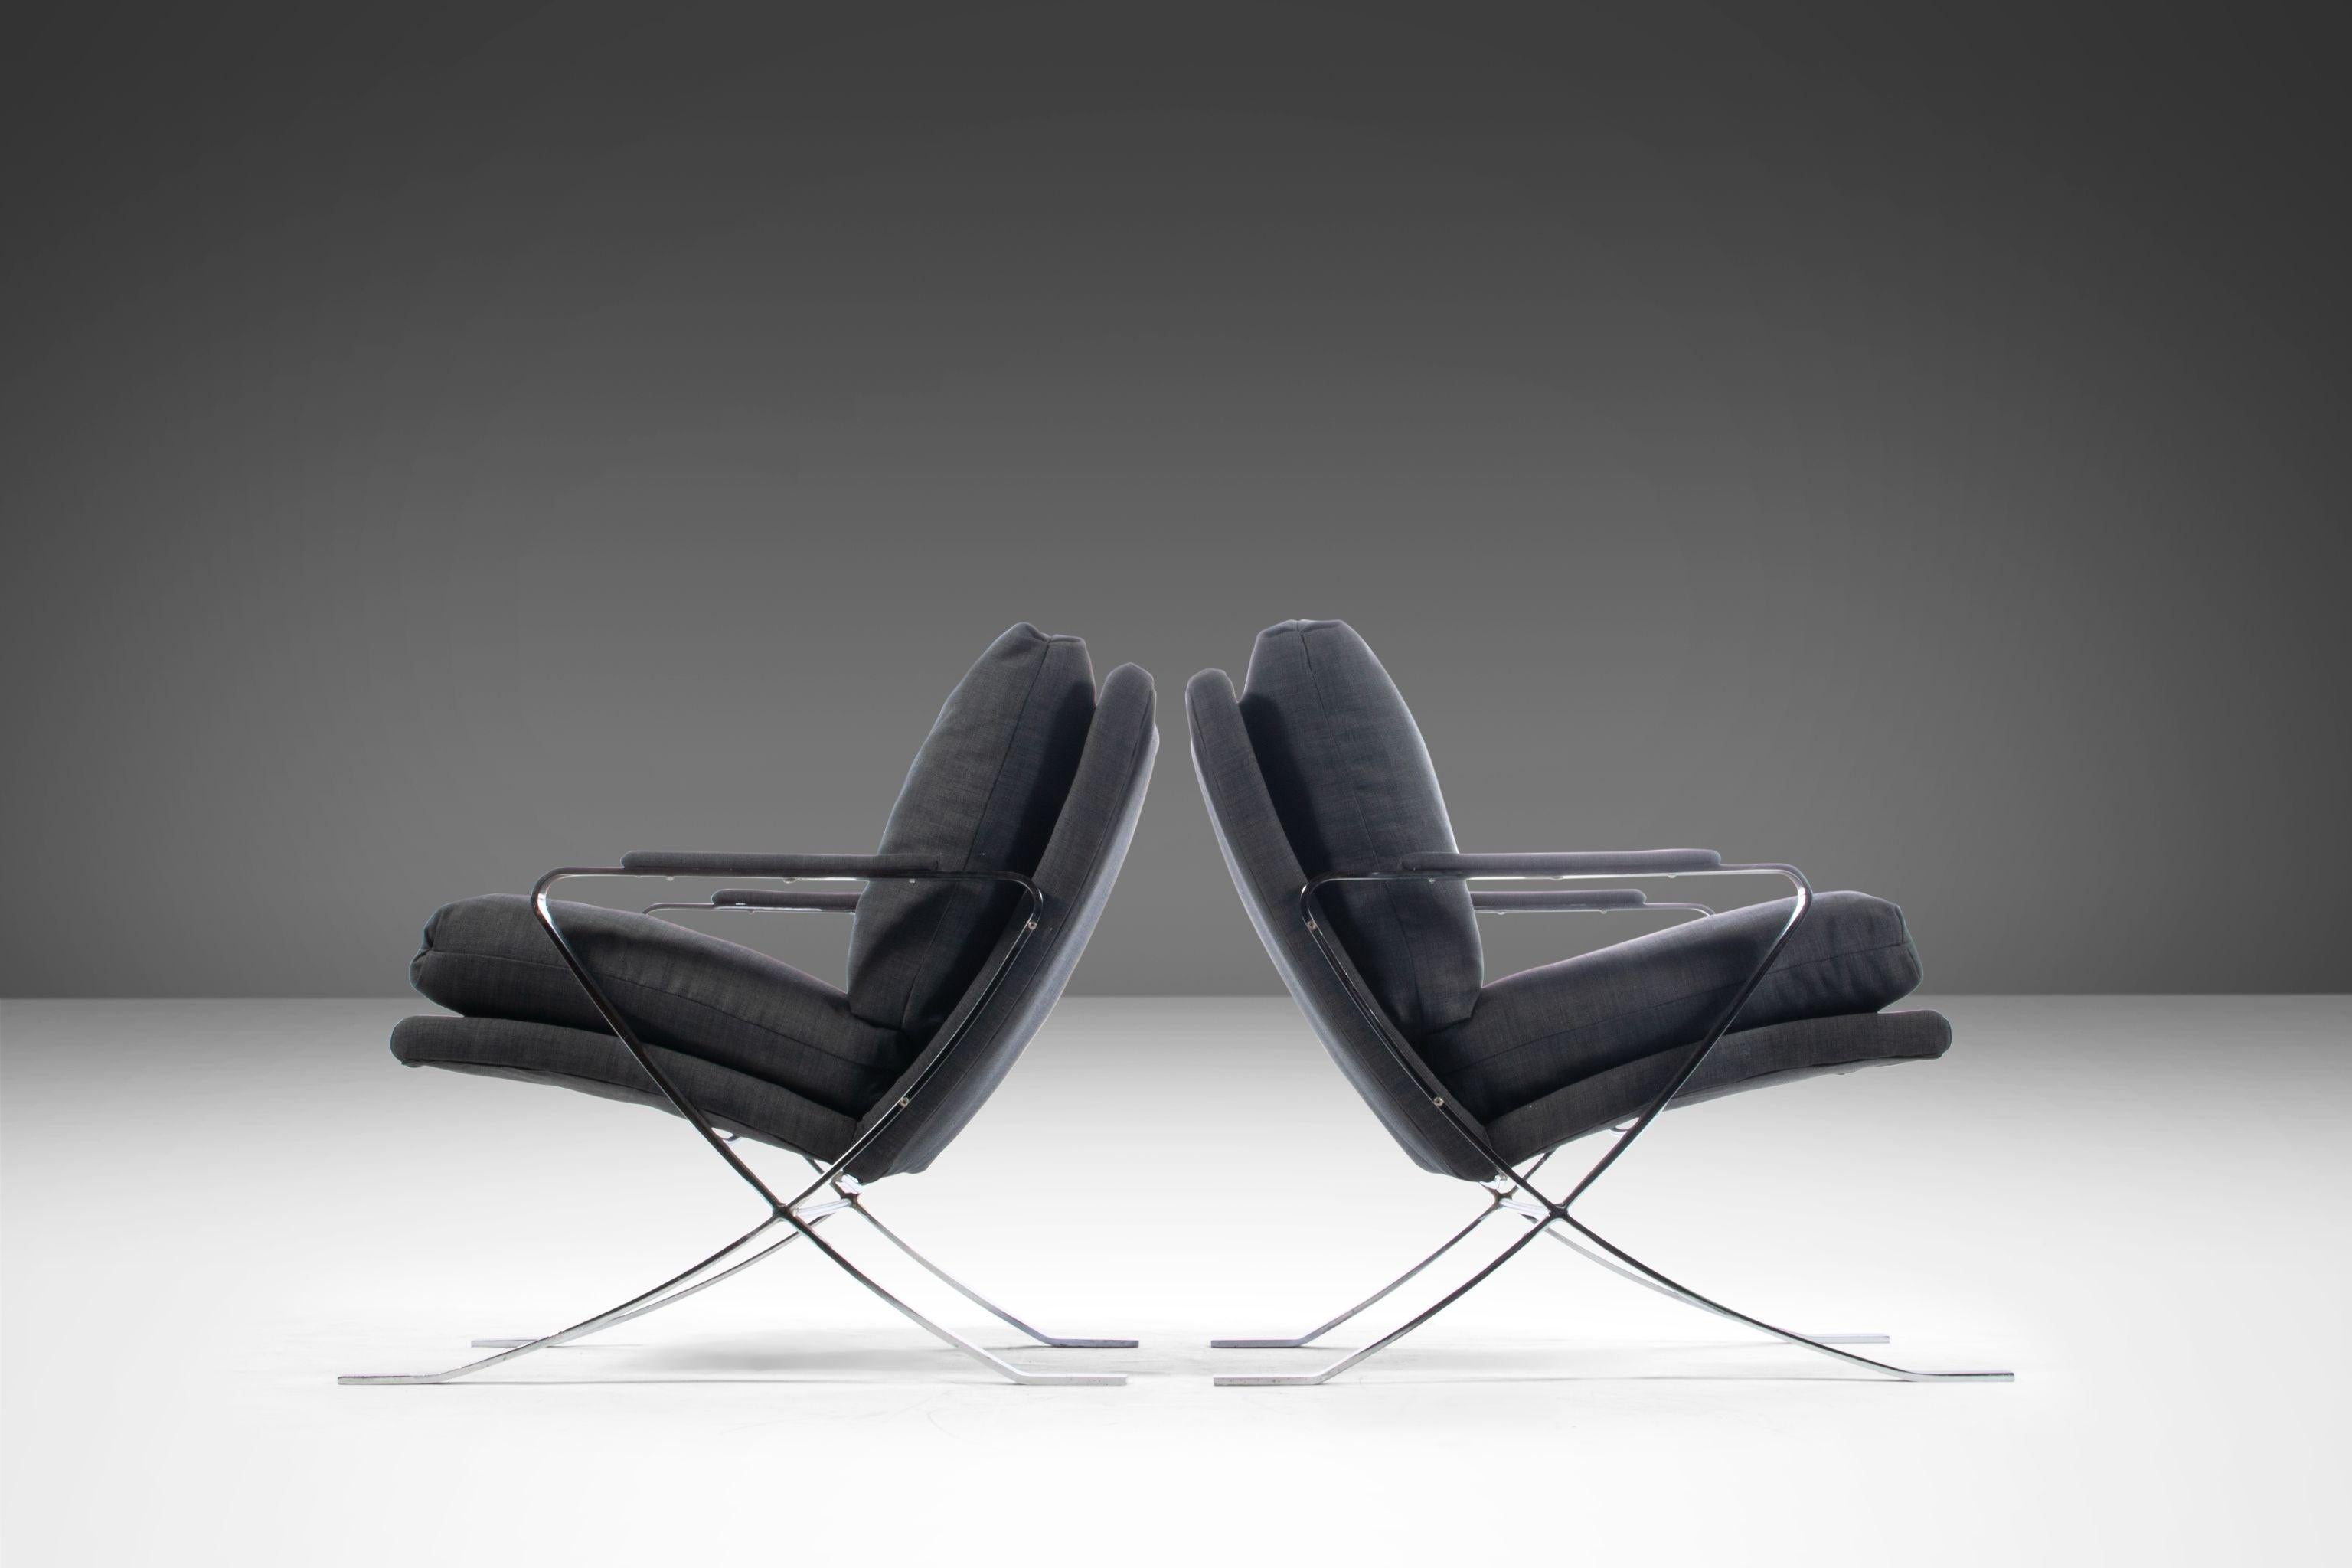 Set of Two (2) Flair Lounge Chairs by Bernhardt Flair in Chrome, USA, c. 1970's For Sale 5